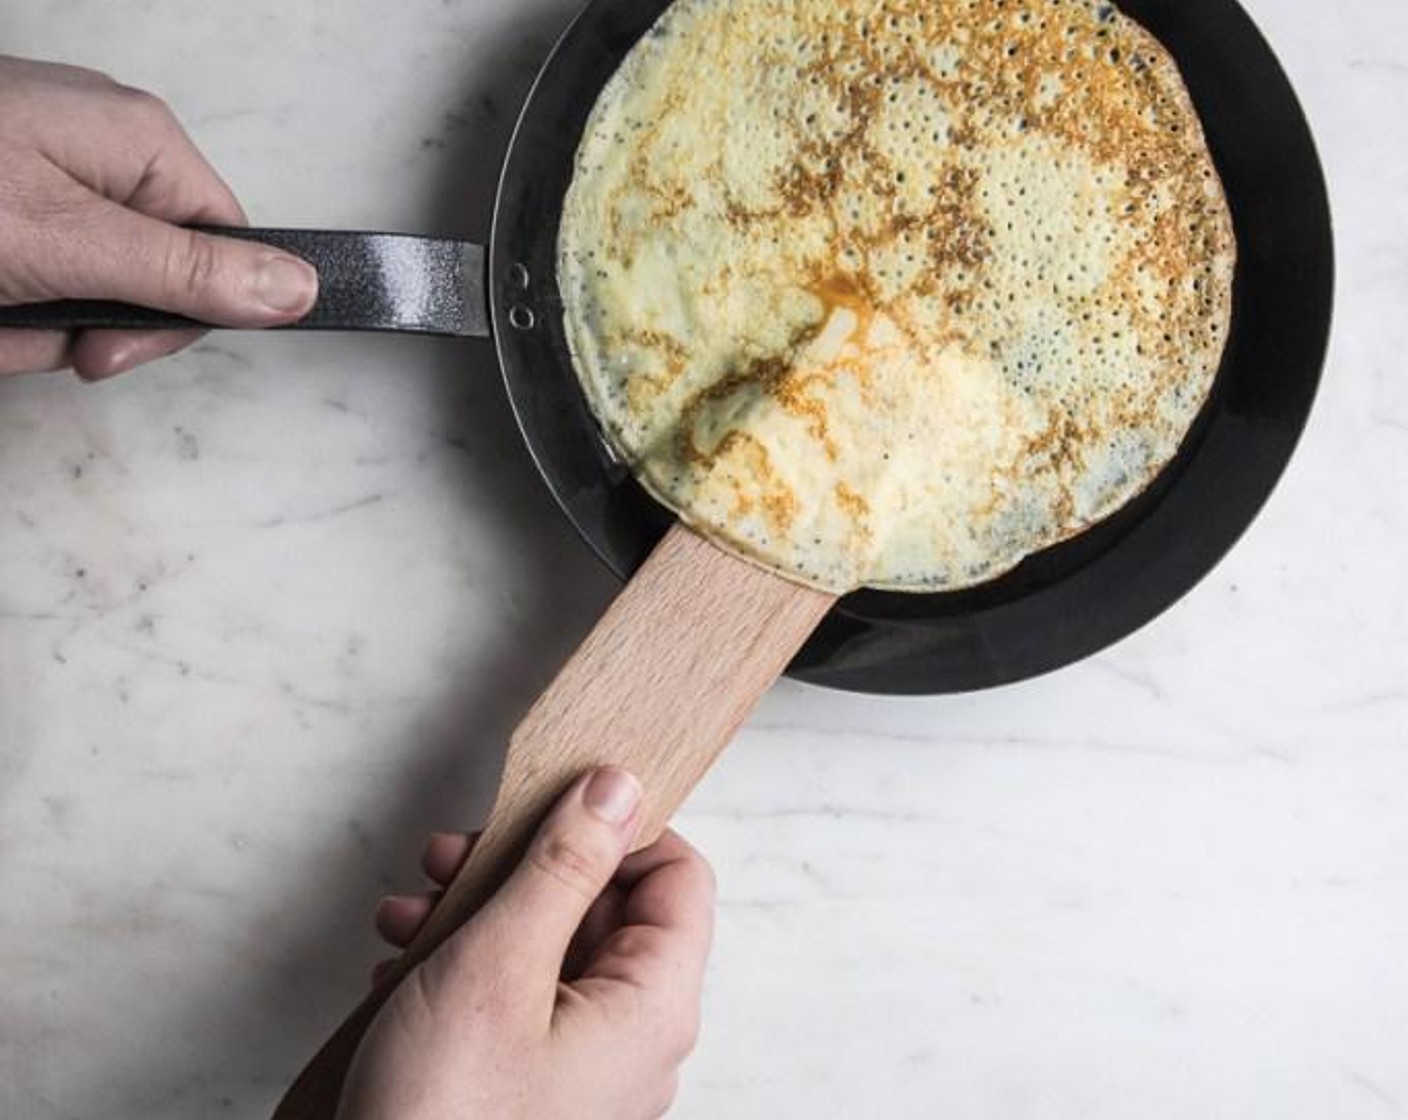 step 5 Once the crepe batter has chilled in refrigerator, heat a 7-inch crepe pan over medium low heat and add a scant 1/4 cup of crepe batter the heated pan, swirling the pan to evenly coat it with the batter.